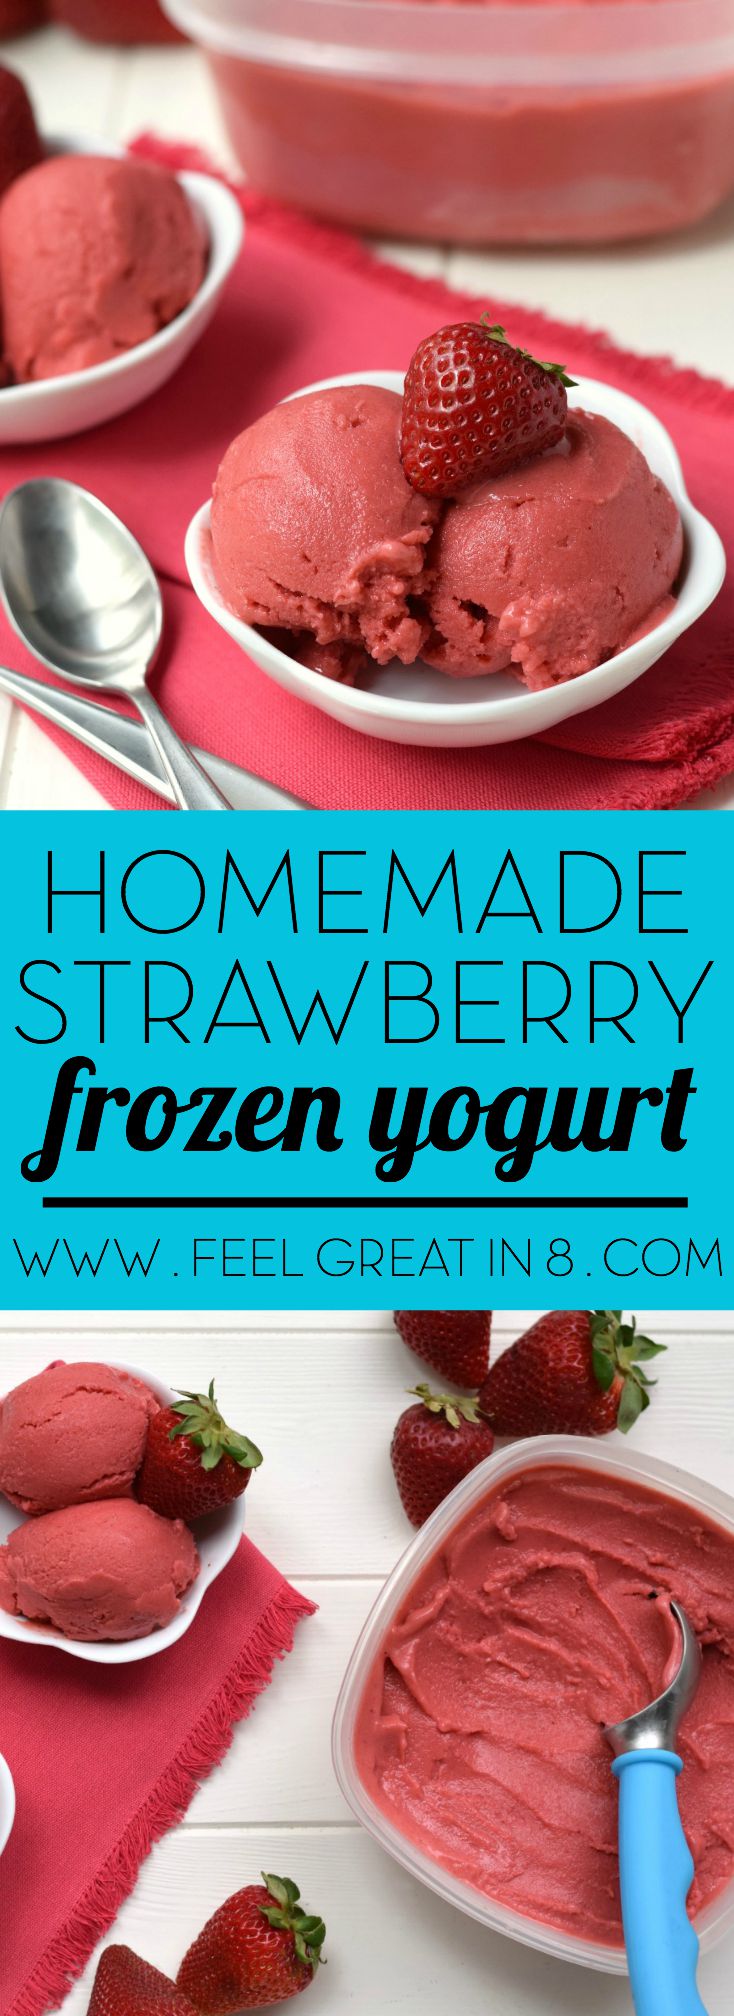 You only need 5 minutes and 4 healthy real food ingredients to make this Homemade Strawberry Frozen Yogurt - No ice cream maker required! At only 100 calories per serving, you'll love this sweet guilt-free dessert!